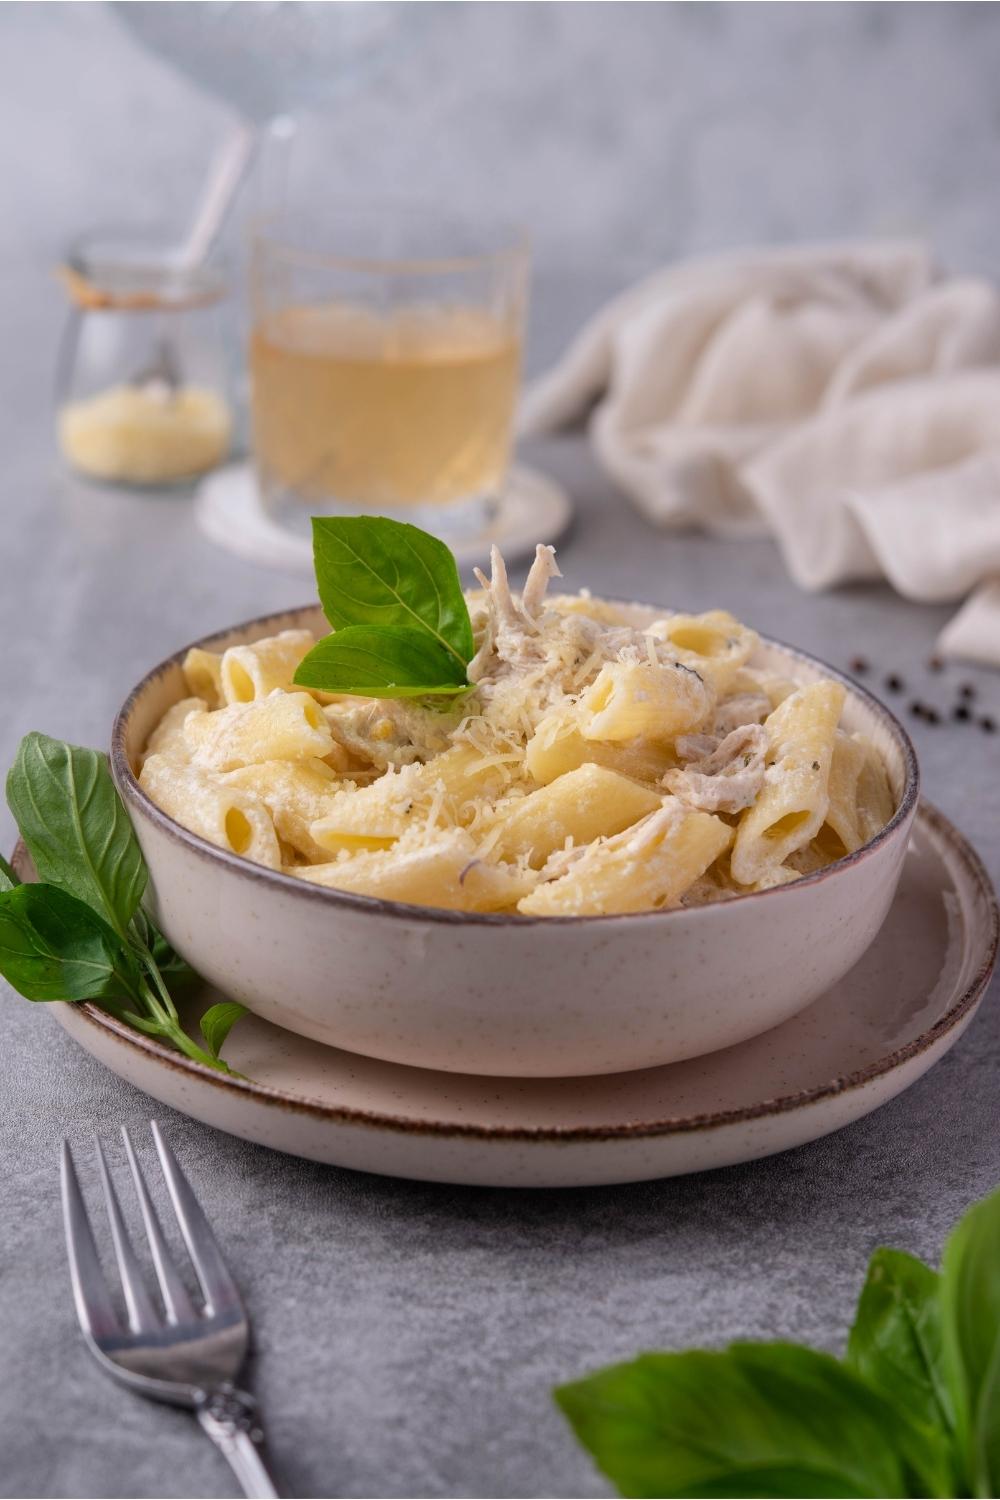 Olive Garden chicken pasta in a white bowl that is on a white plate. There is a fork next to the plate and basil leaves decorated around the pasta. In the background there is a full glass, a bowl of shredded cheese, and a white kitchen towel.